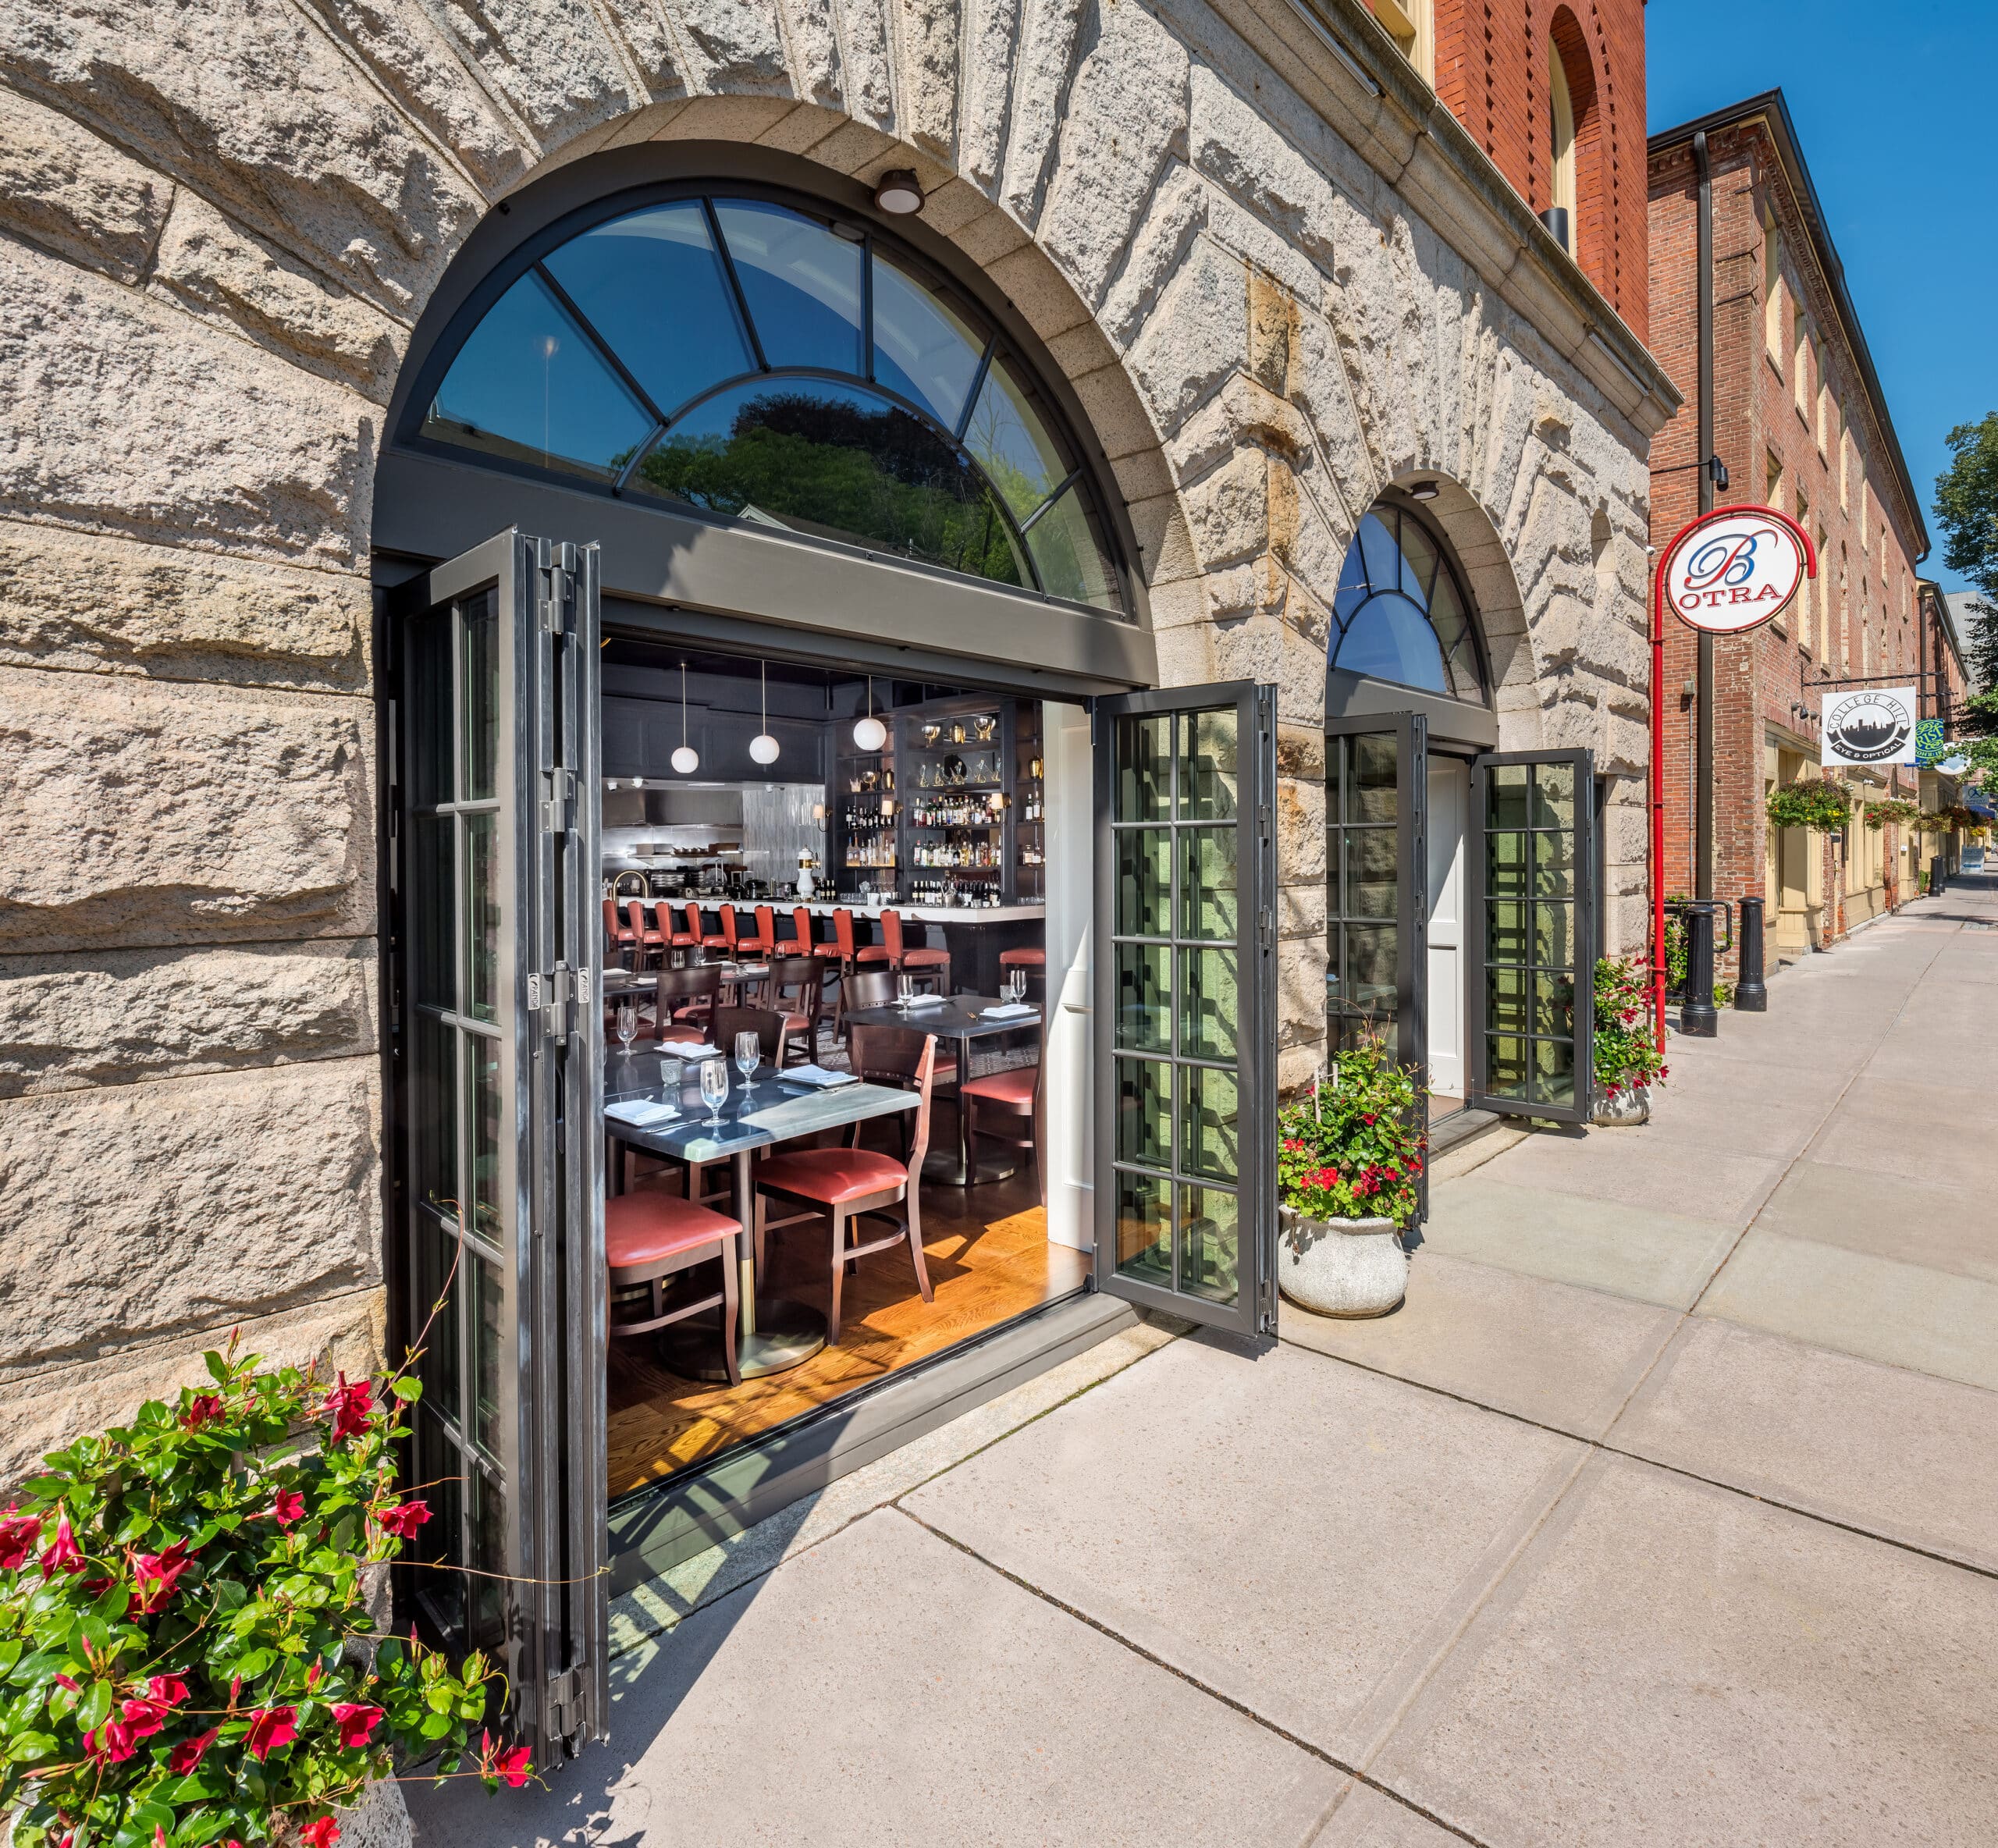 custom bi-fold doors open the restaurant up to the street, enticing passersby.